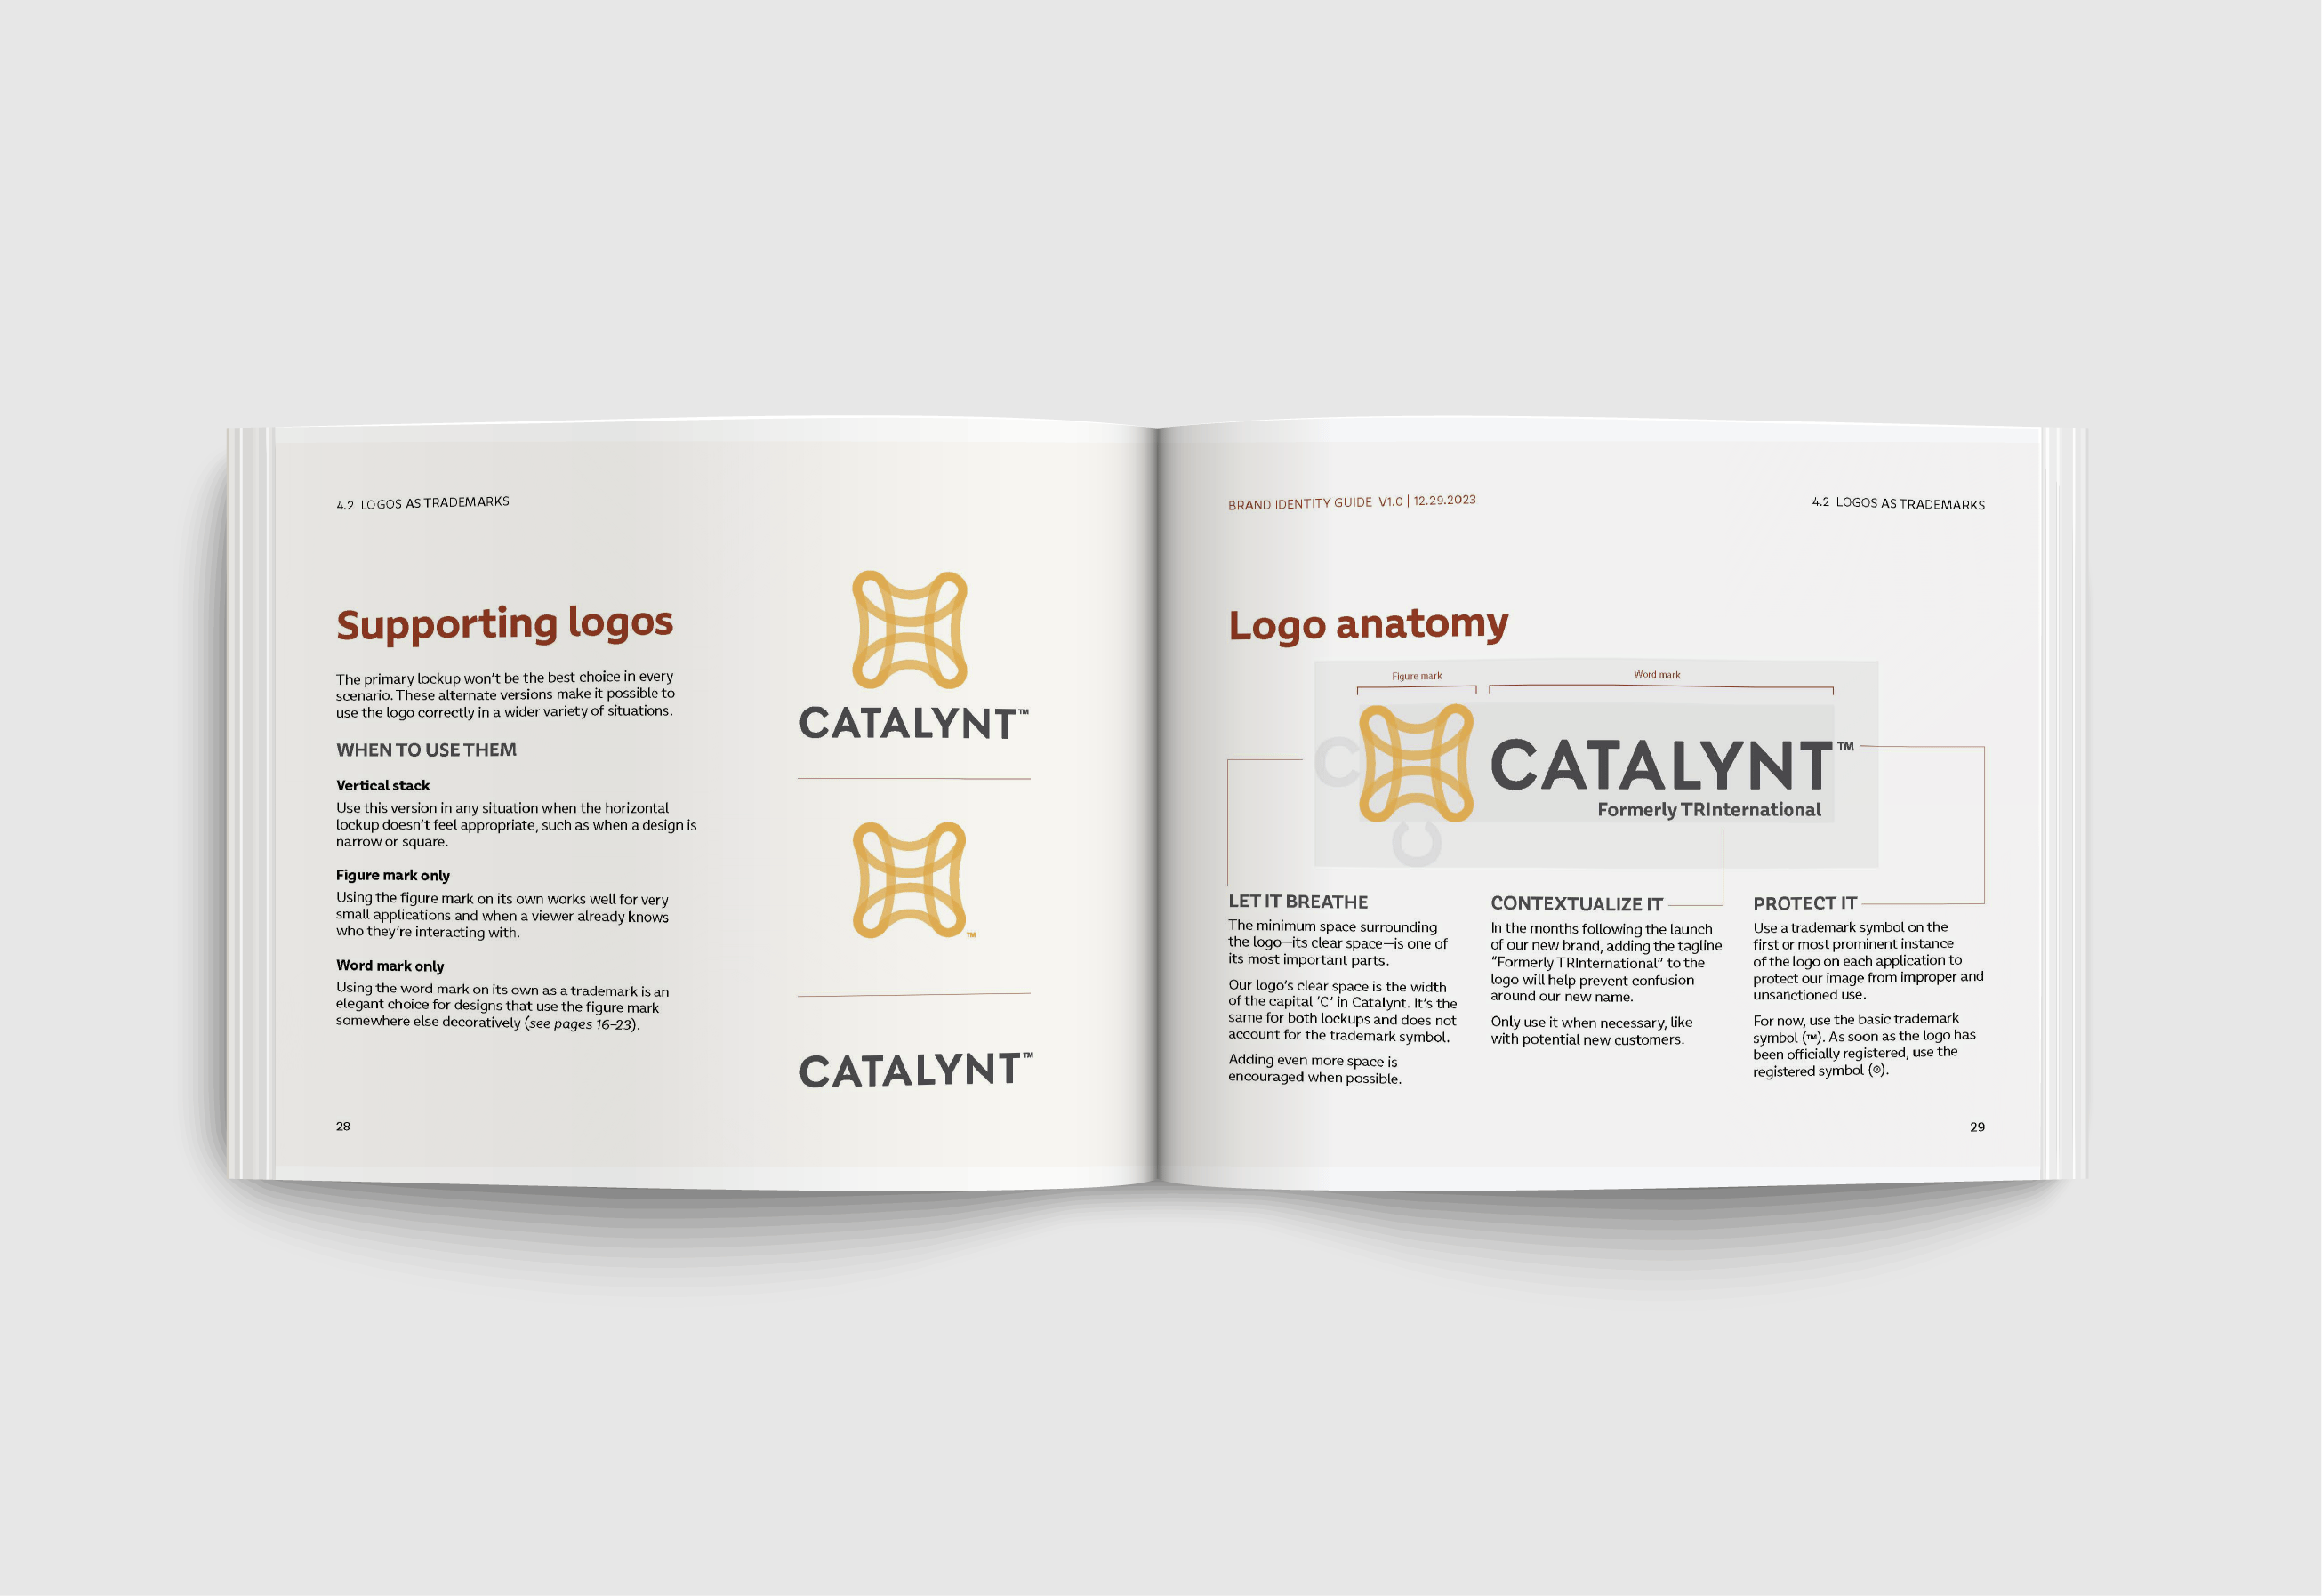 Inside spread of booklet explaining the usages of the Catalynt logo